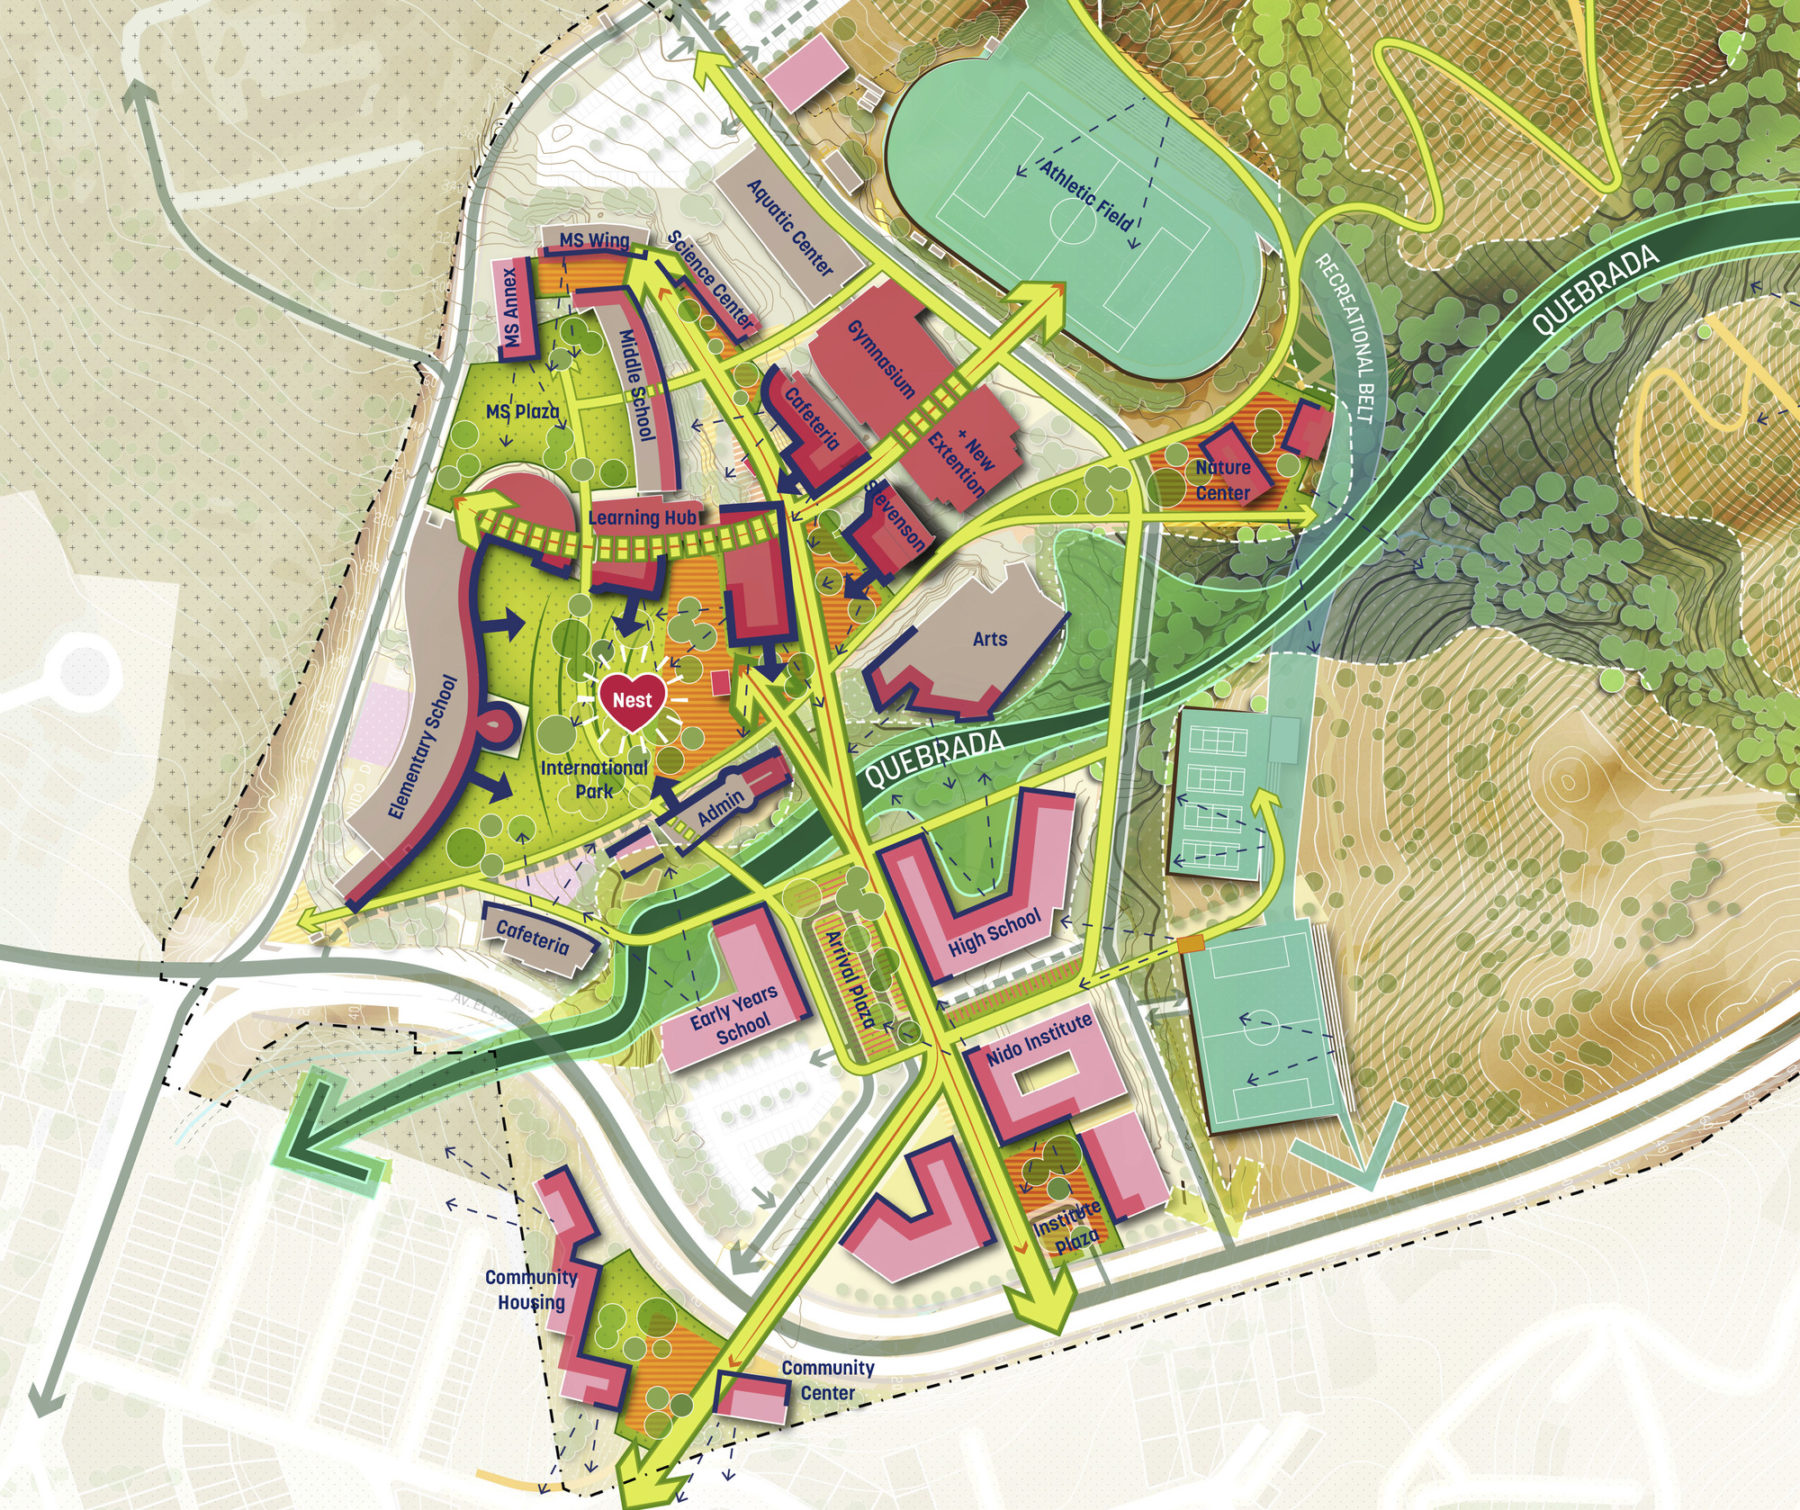 plan drawing of campus framework with major circulation routes highlighted in dark and light green arrows and buildings labeled